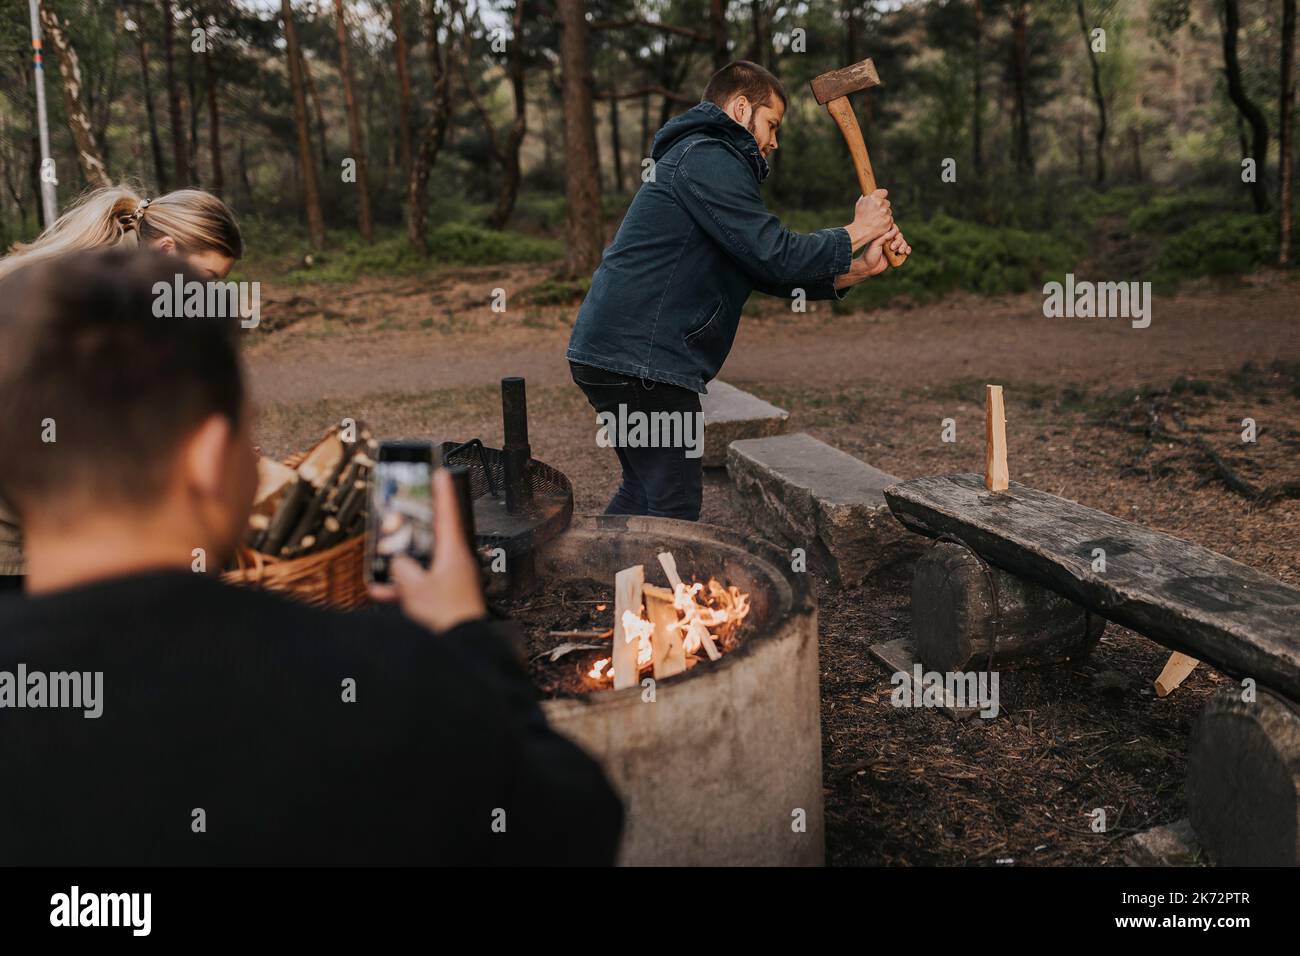 Man taking picture of friend chopping wood Stock Photo